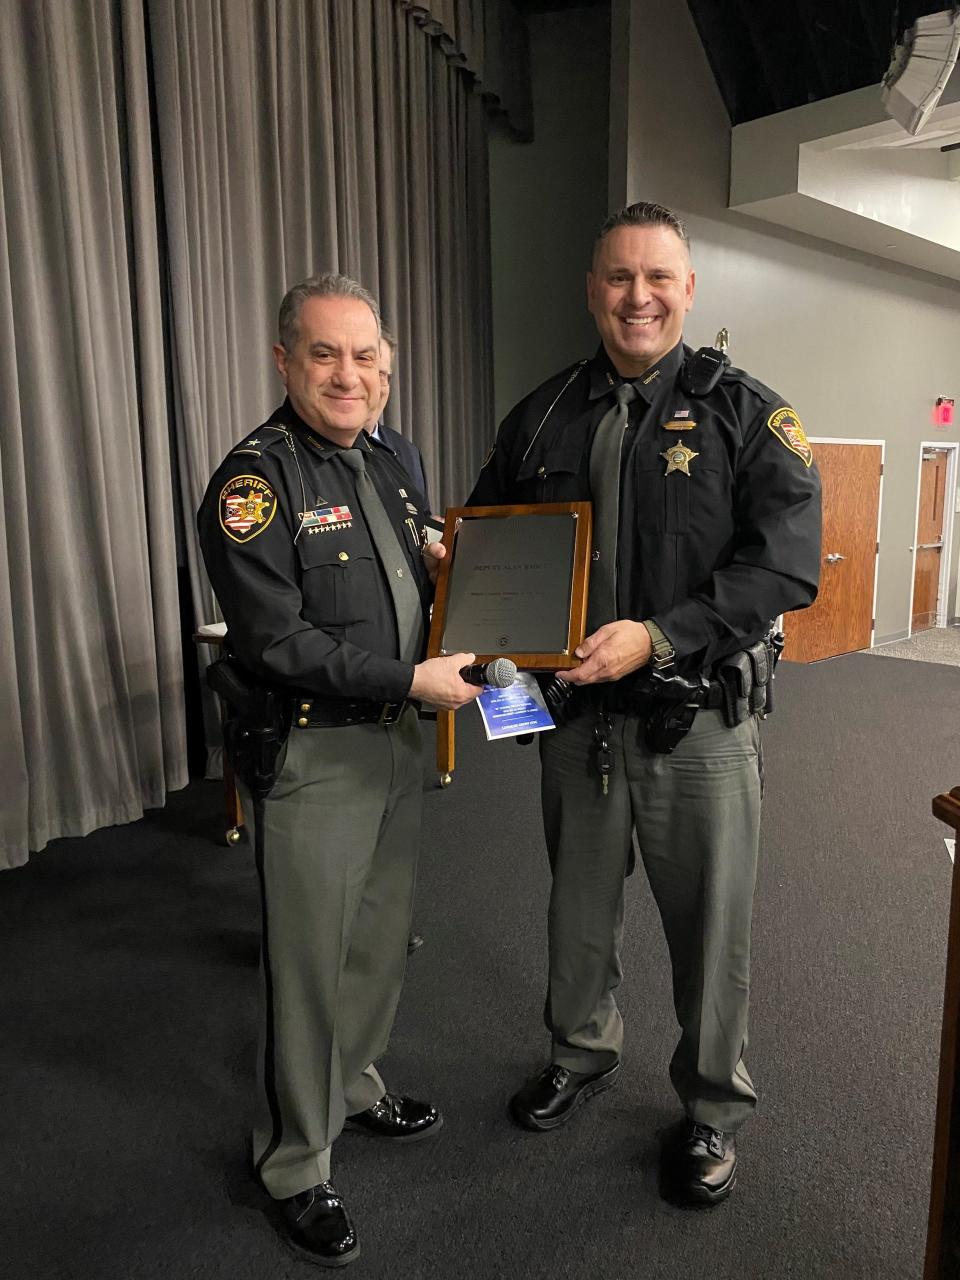 Stark County Sheriff George Maier, left, stands with Deputy Alan Raber, who was named Stark County Deputy of the Year on Wednesday at the Crime Prevention Breakfast sponsored by the Exchange Club of Canton-Stark County.